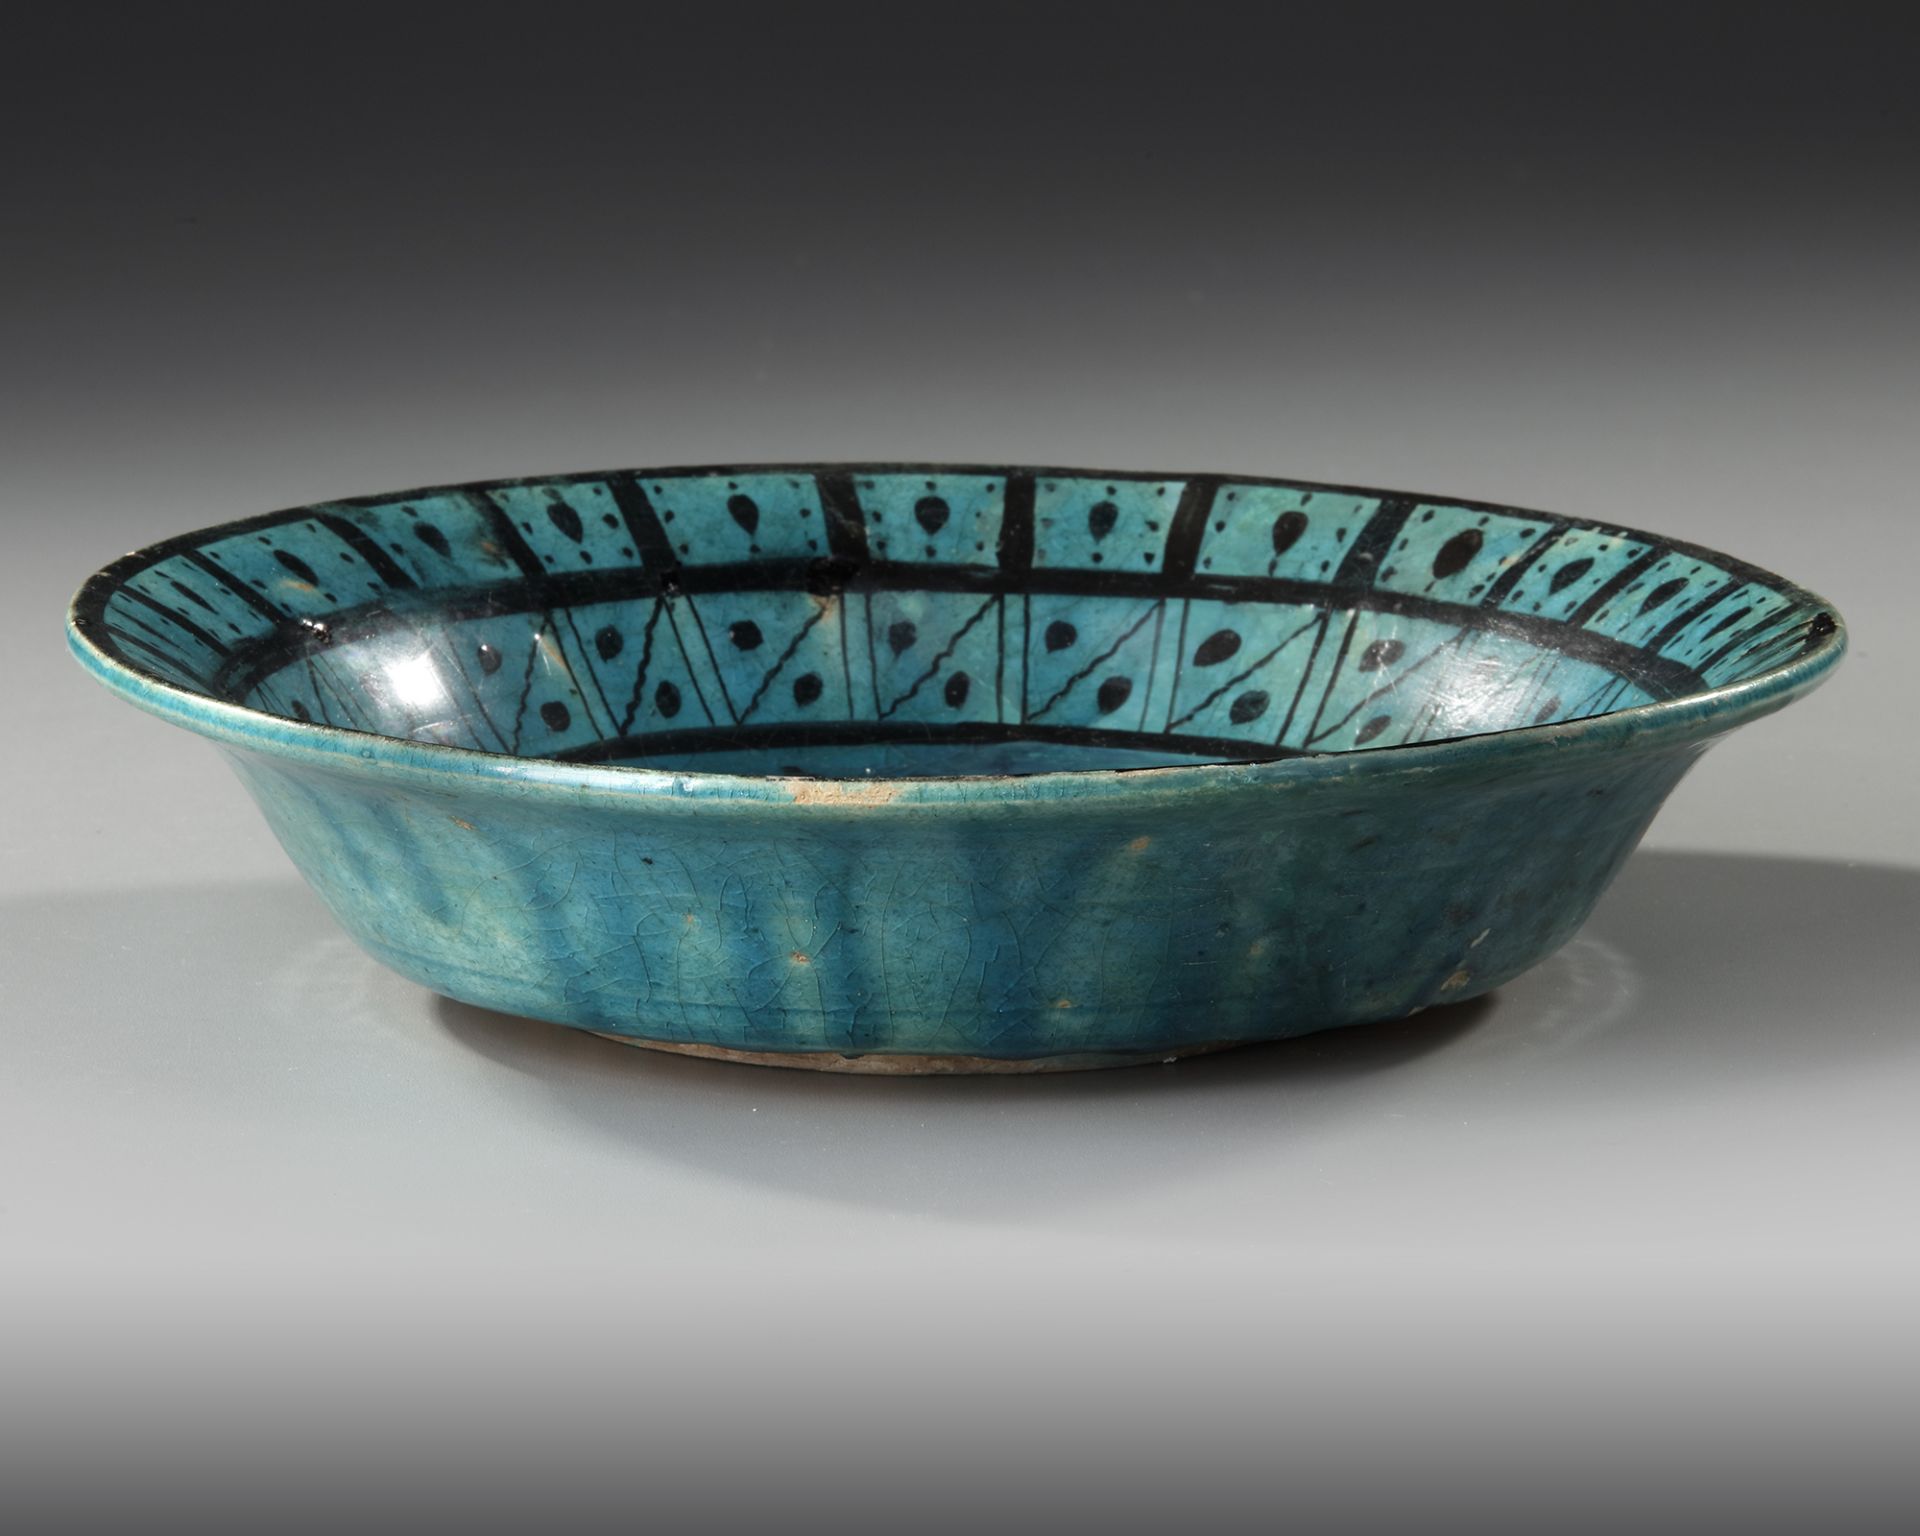 A RAQQA TURQUOISE-GLAZED POTTERY DISH, SYRIA, EARLY 13TH CENTURY - Image 4 of 8